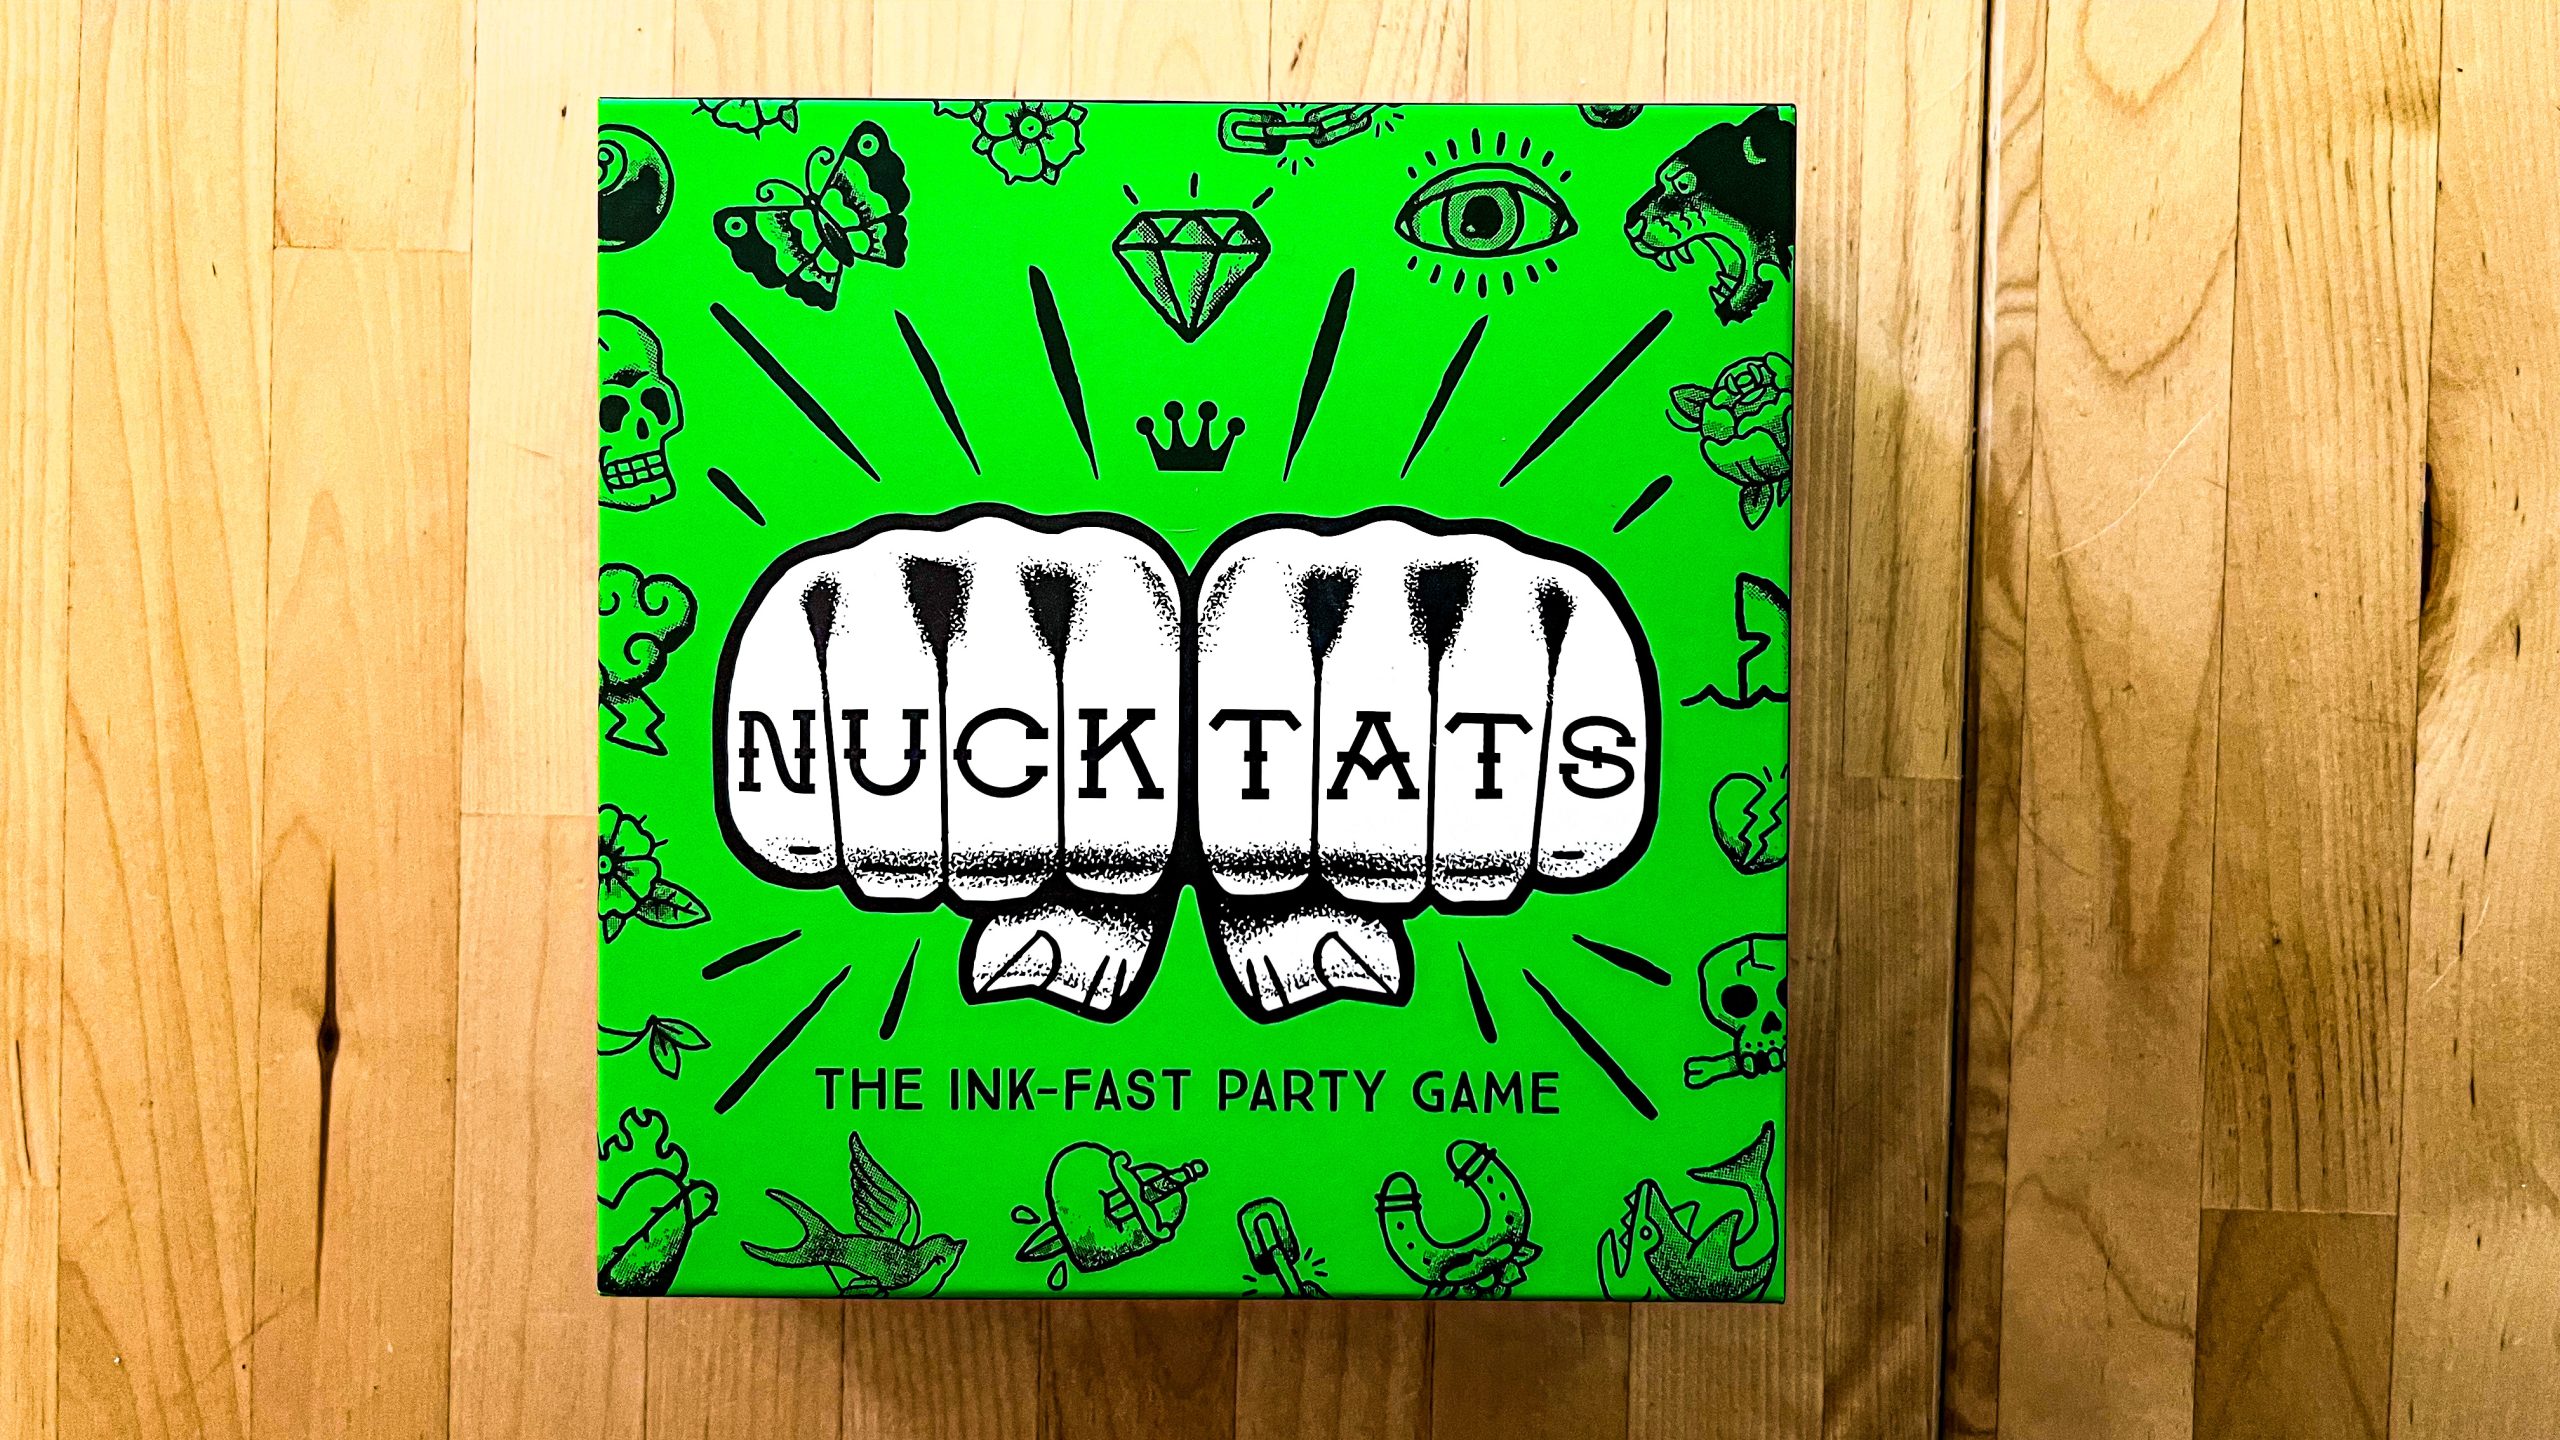 The box art of Nuck Tats, a card game. Shows two fists with the name Nuck Tats written on the fists